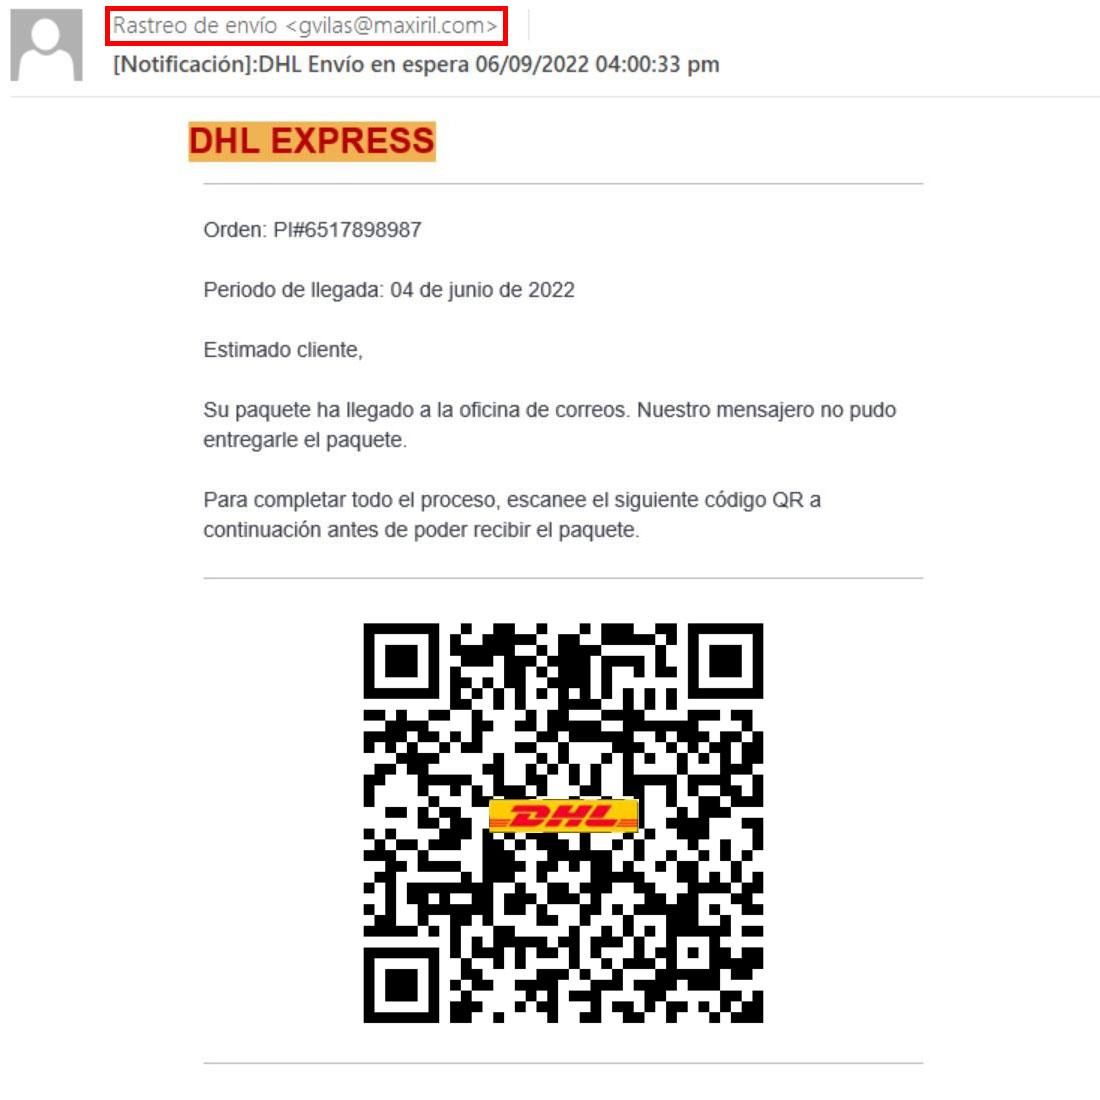 E-mail with QR code supposedly from DHL. For safety, we replaced the QR code in the screenshot with a harmless one